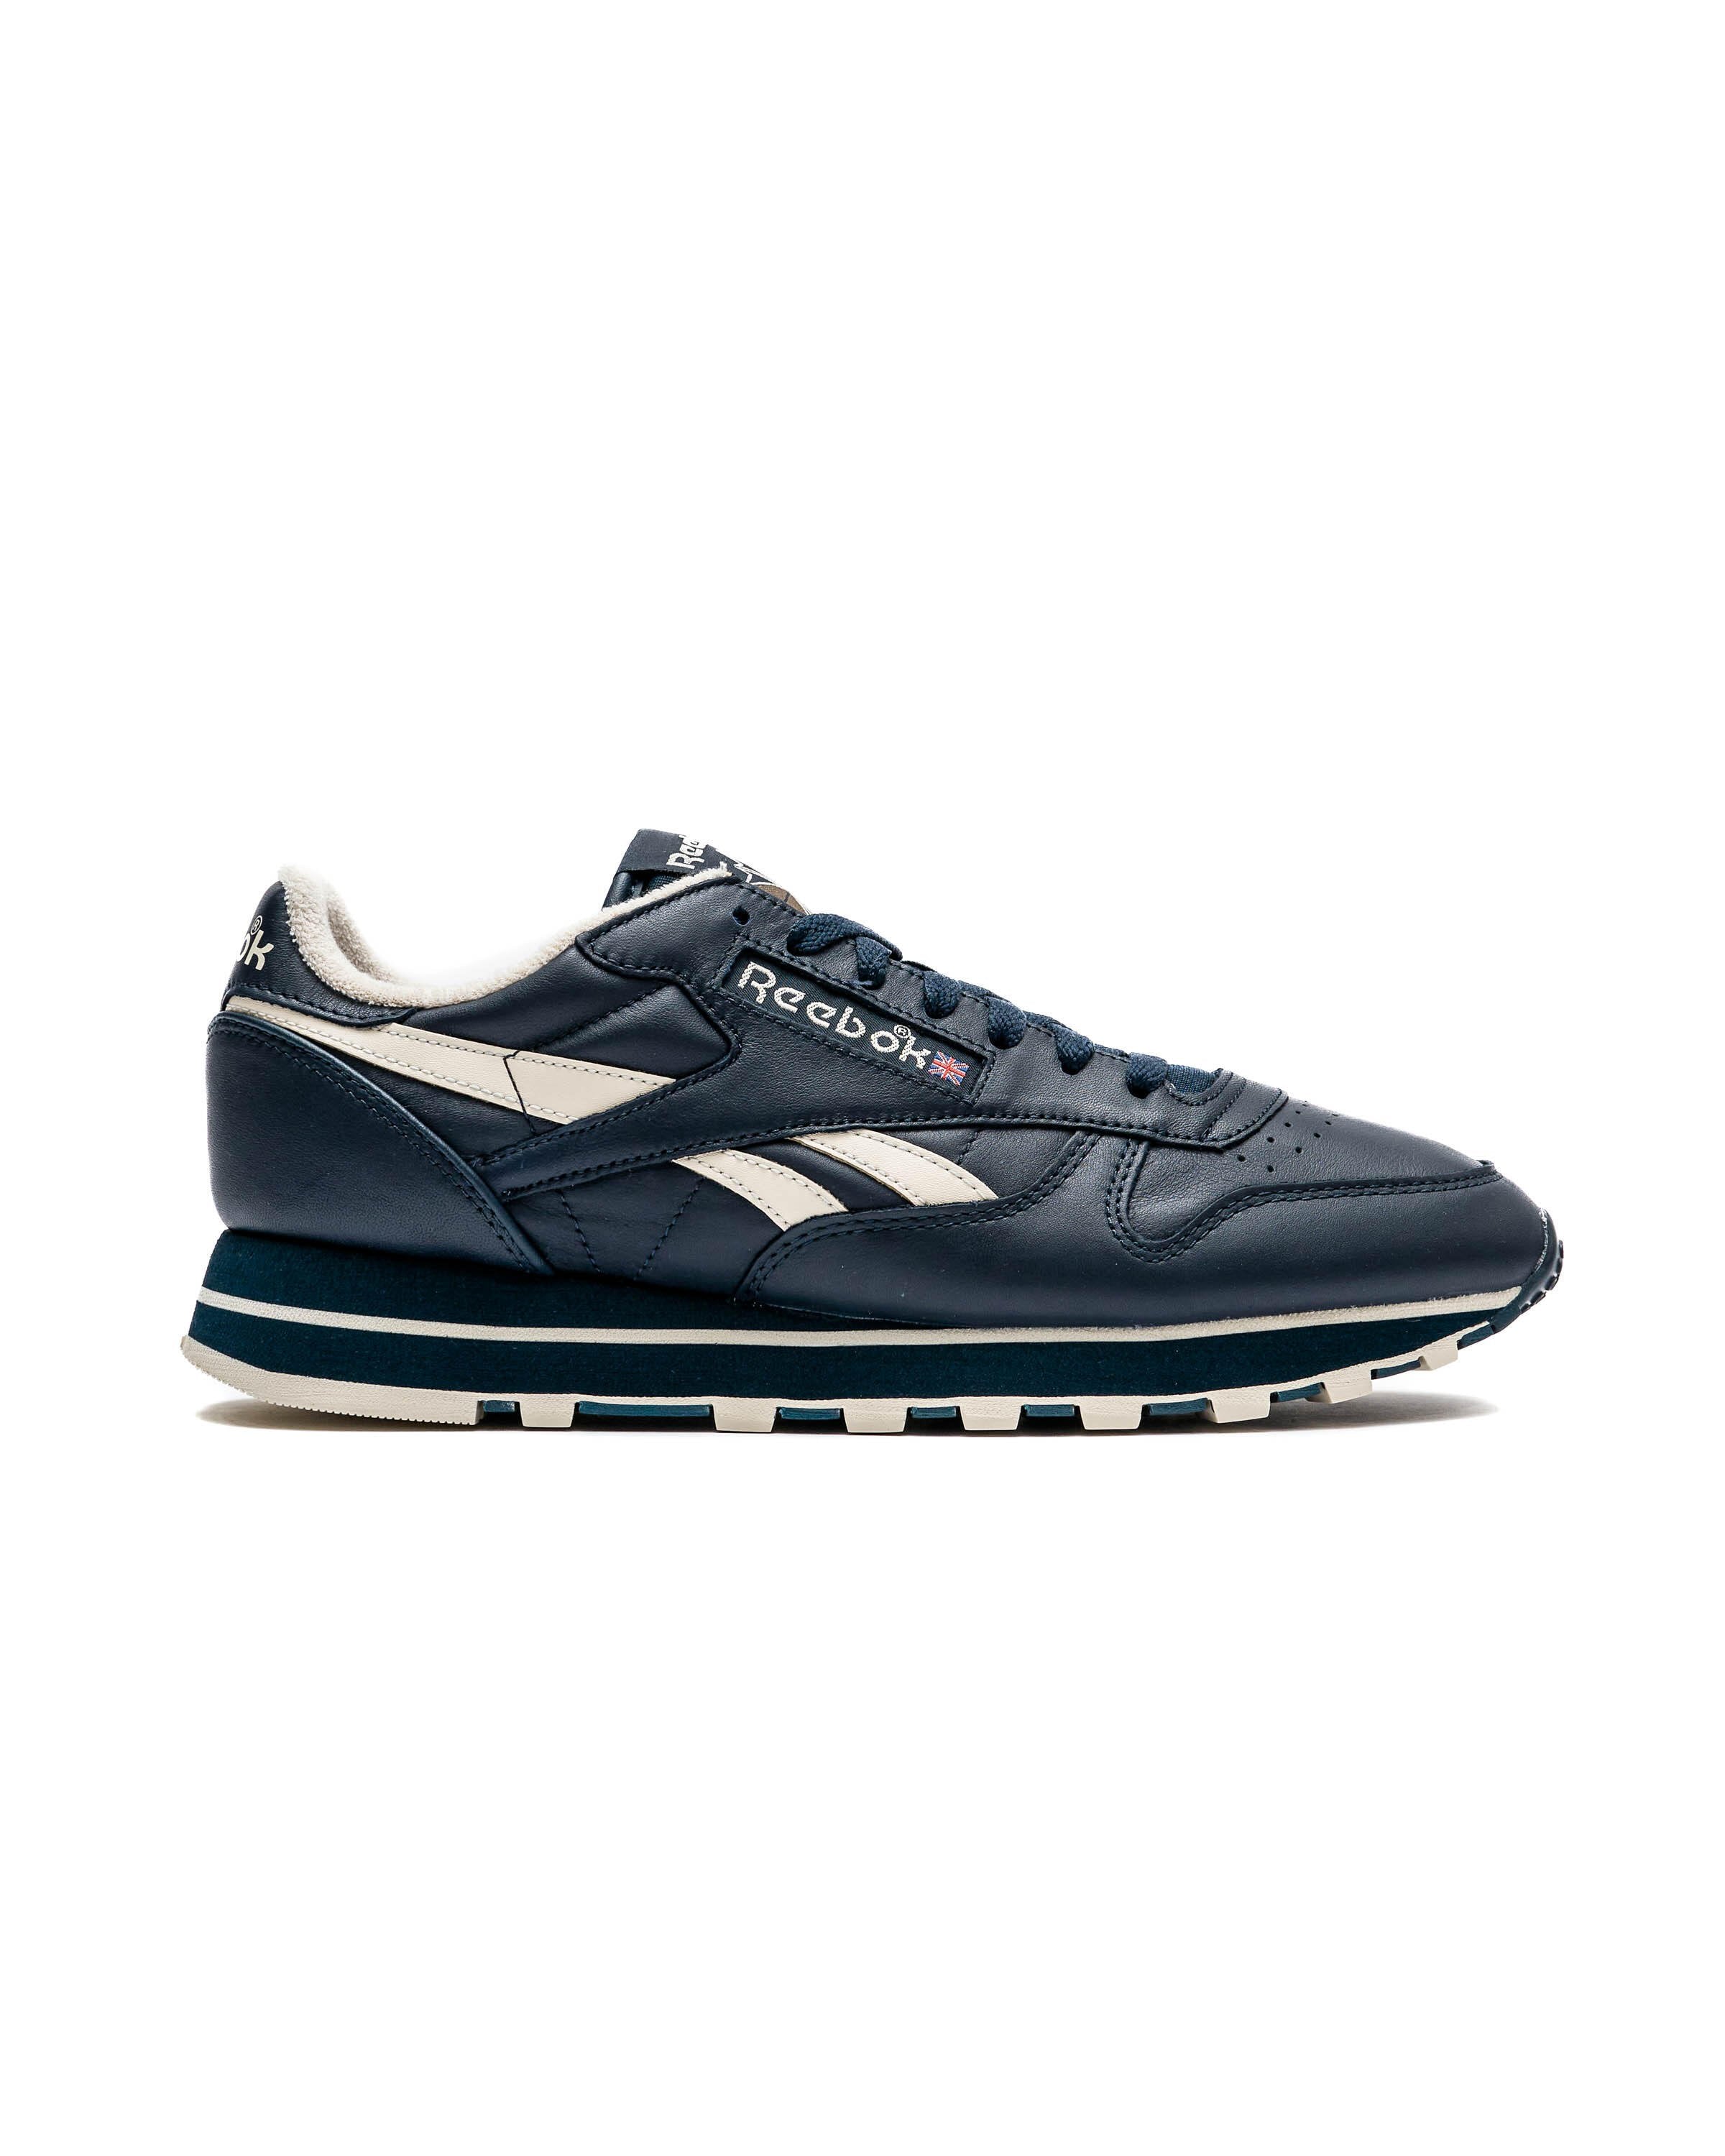 Classic Leather SP Extra Women's Shoes - Chalk / Blue Pearl / Chalk | Reebok